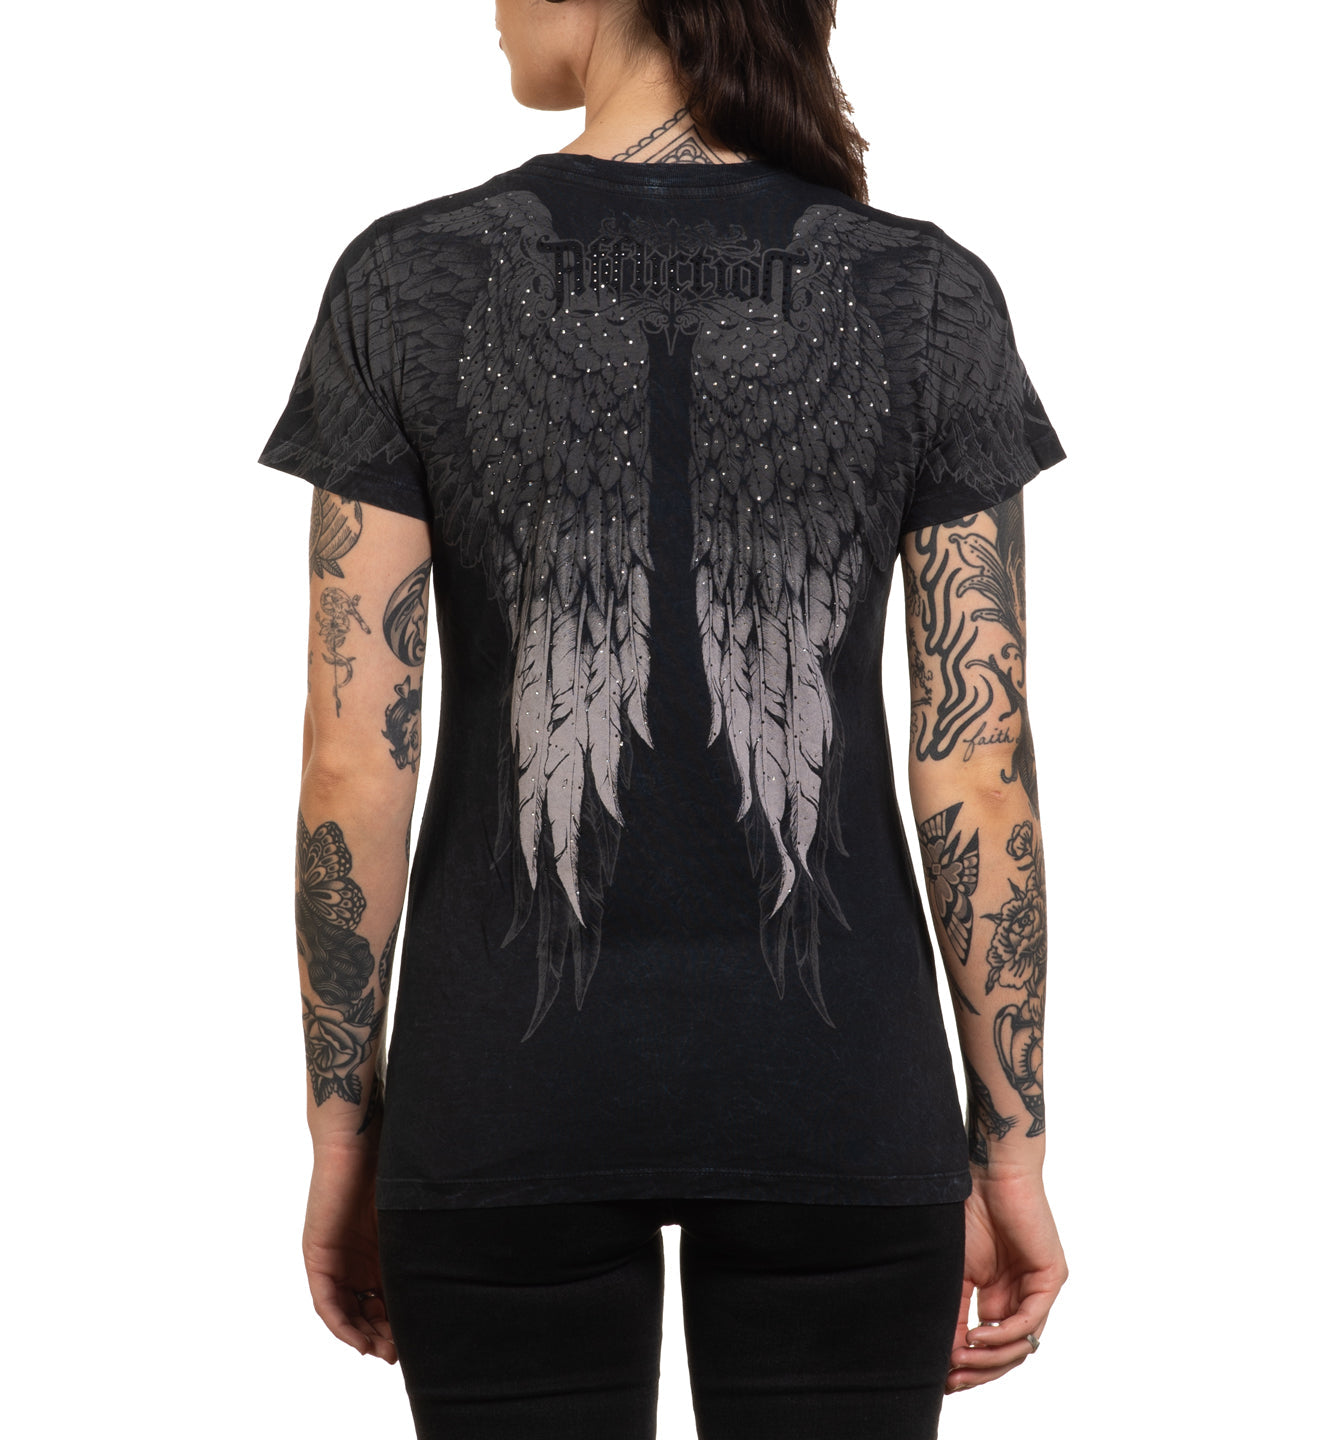 Womens Womens Woven And Fashion Tops - Age Of Winter